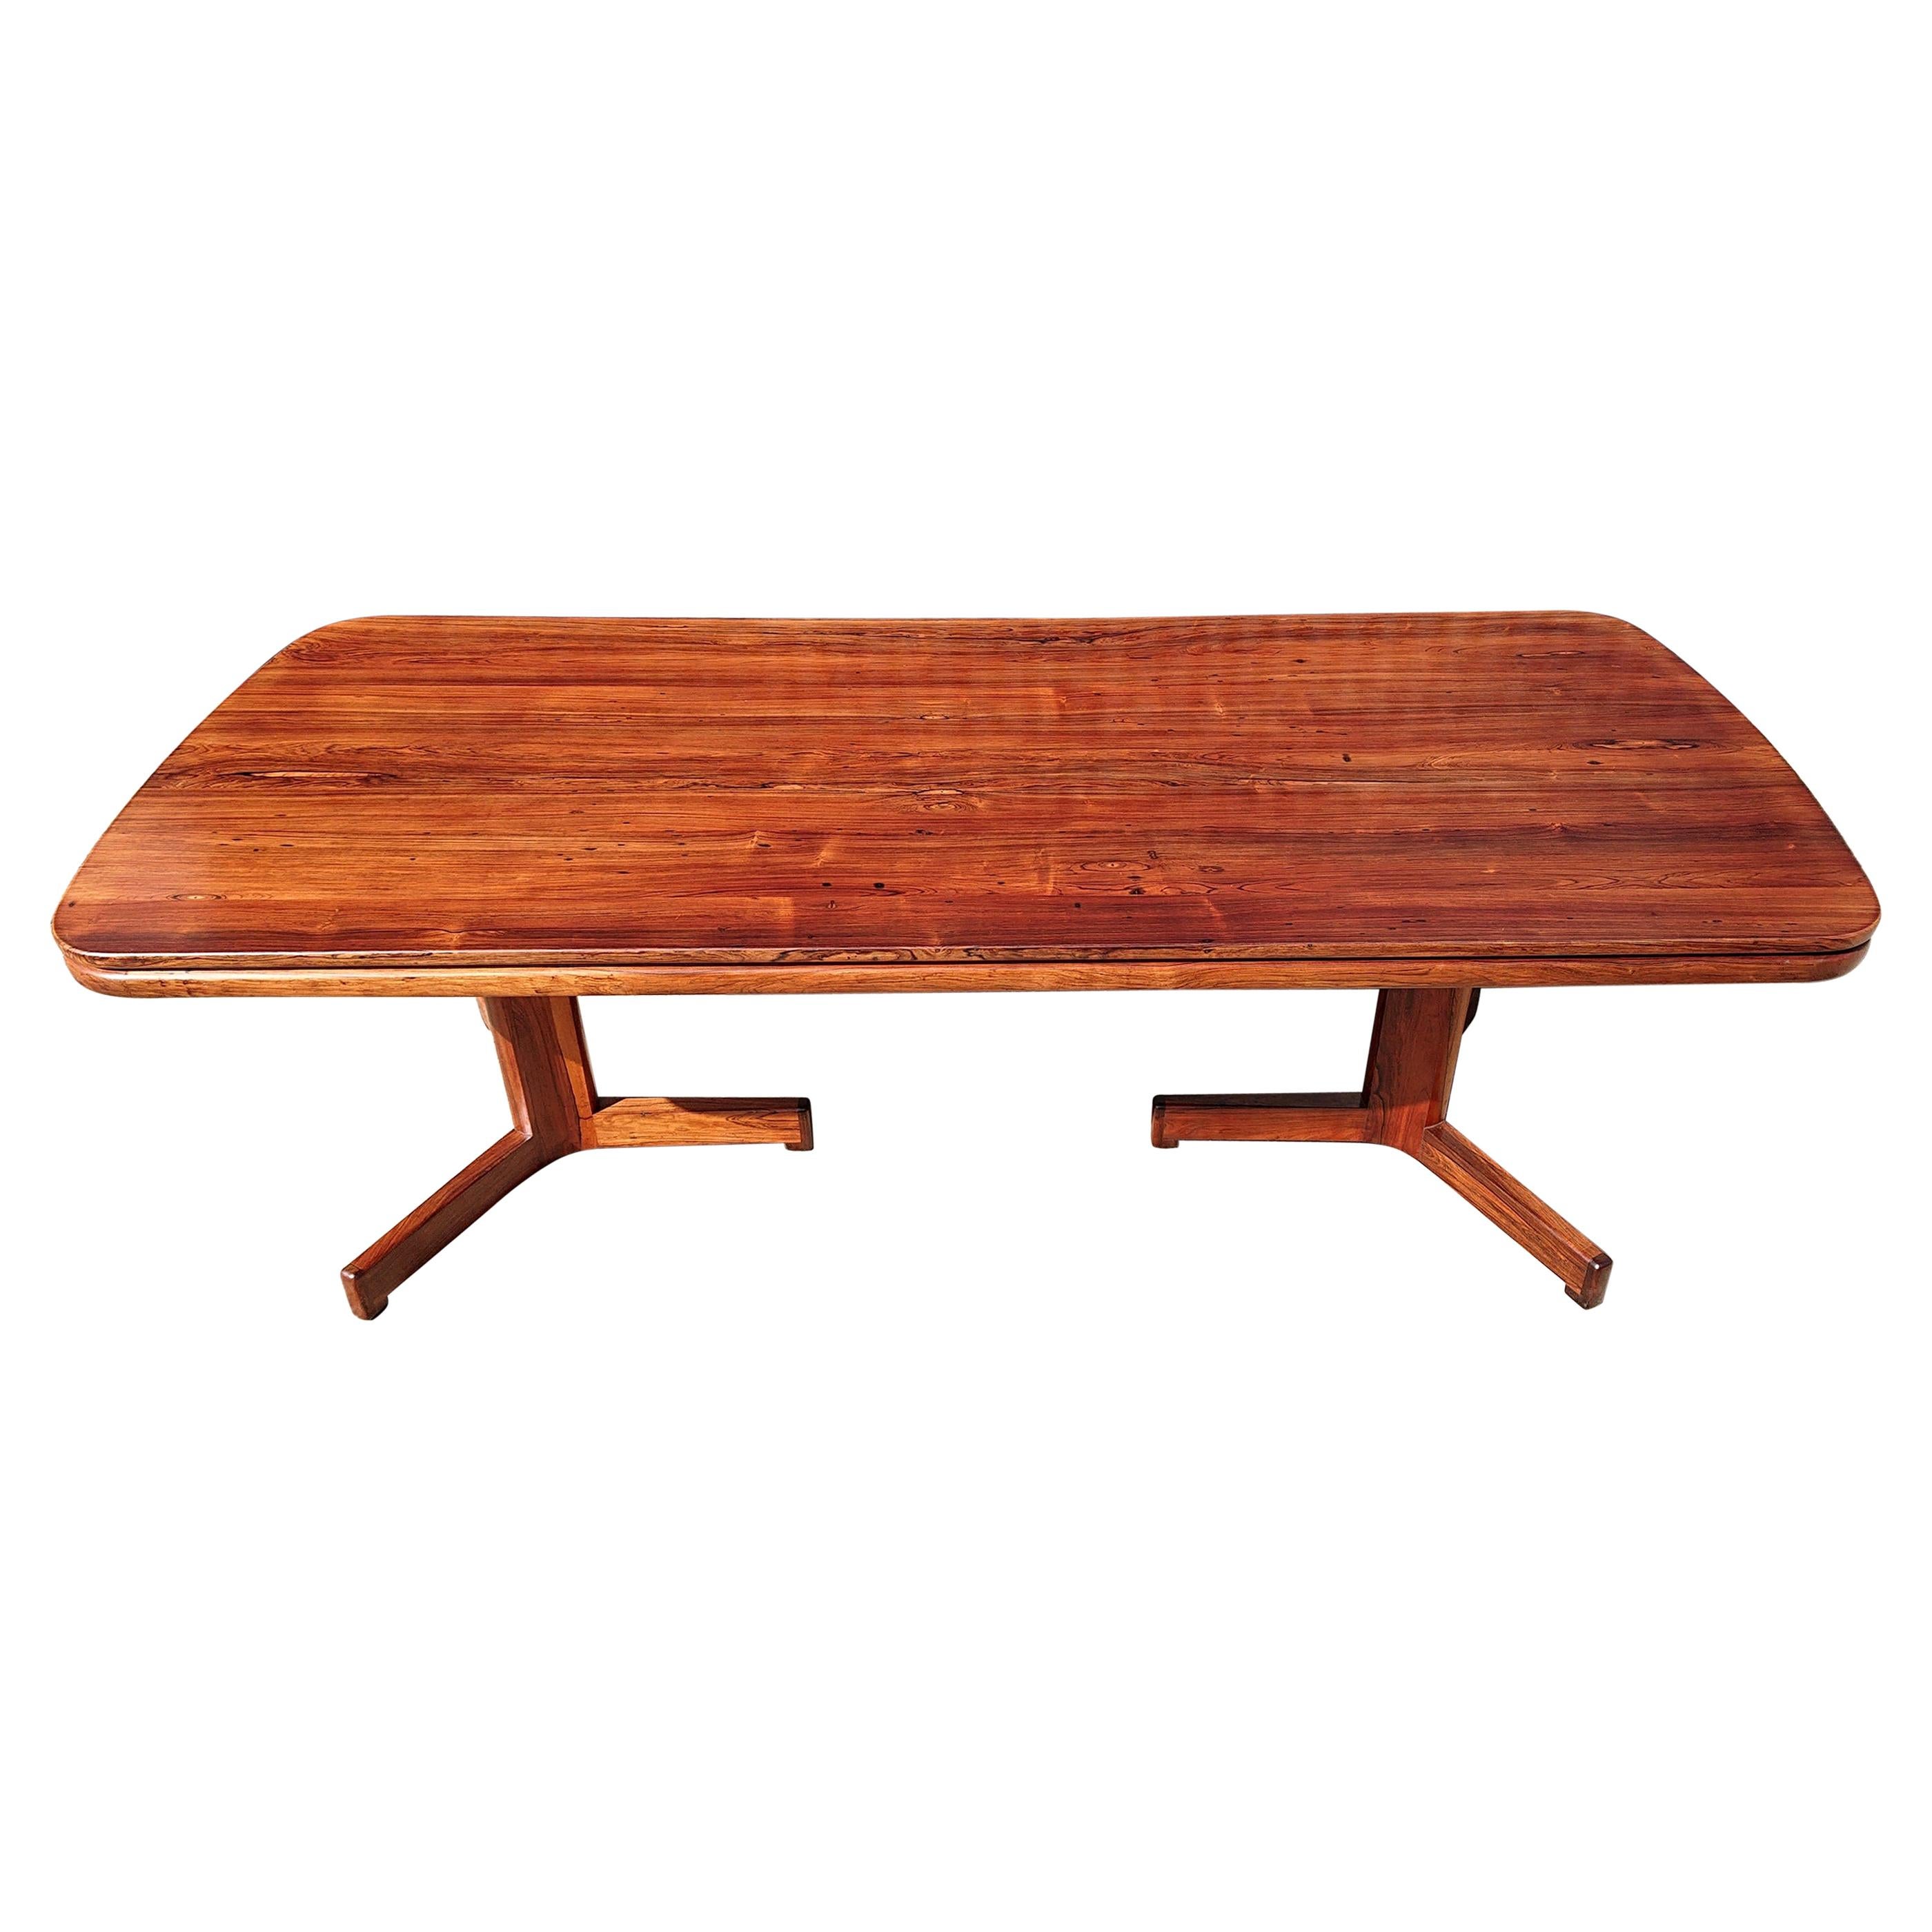 1964 Mid Century Dining Table Made Designed by Michael Knott